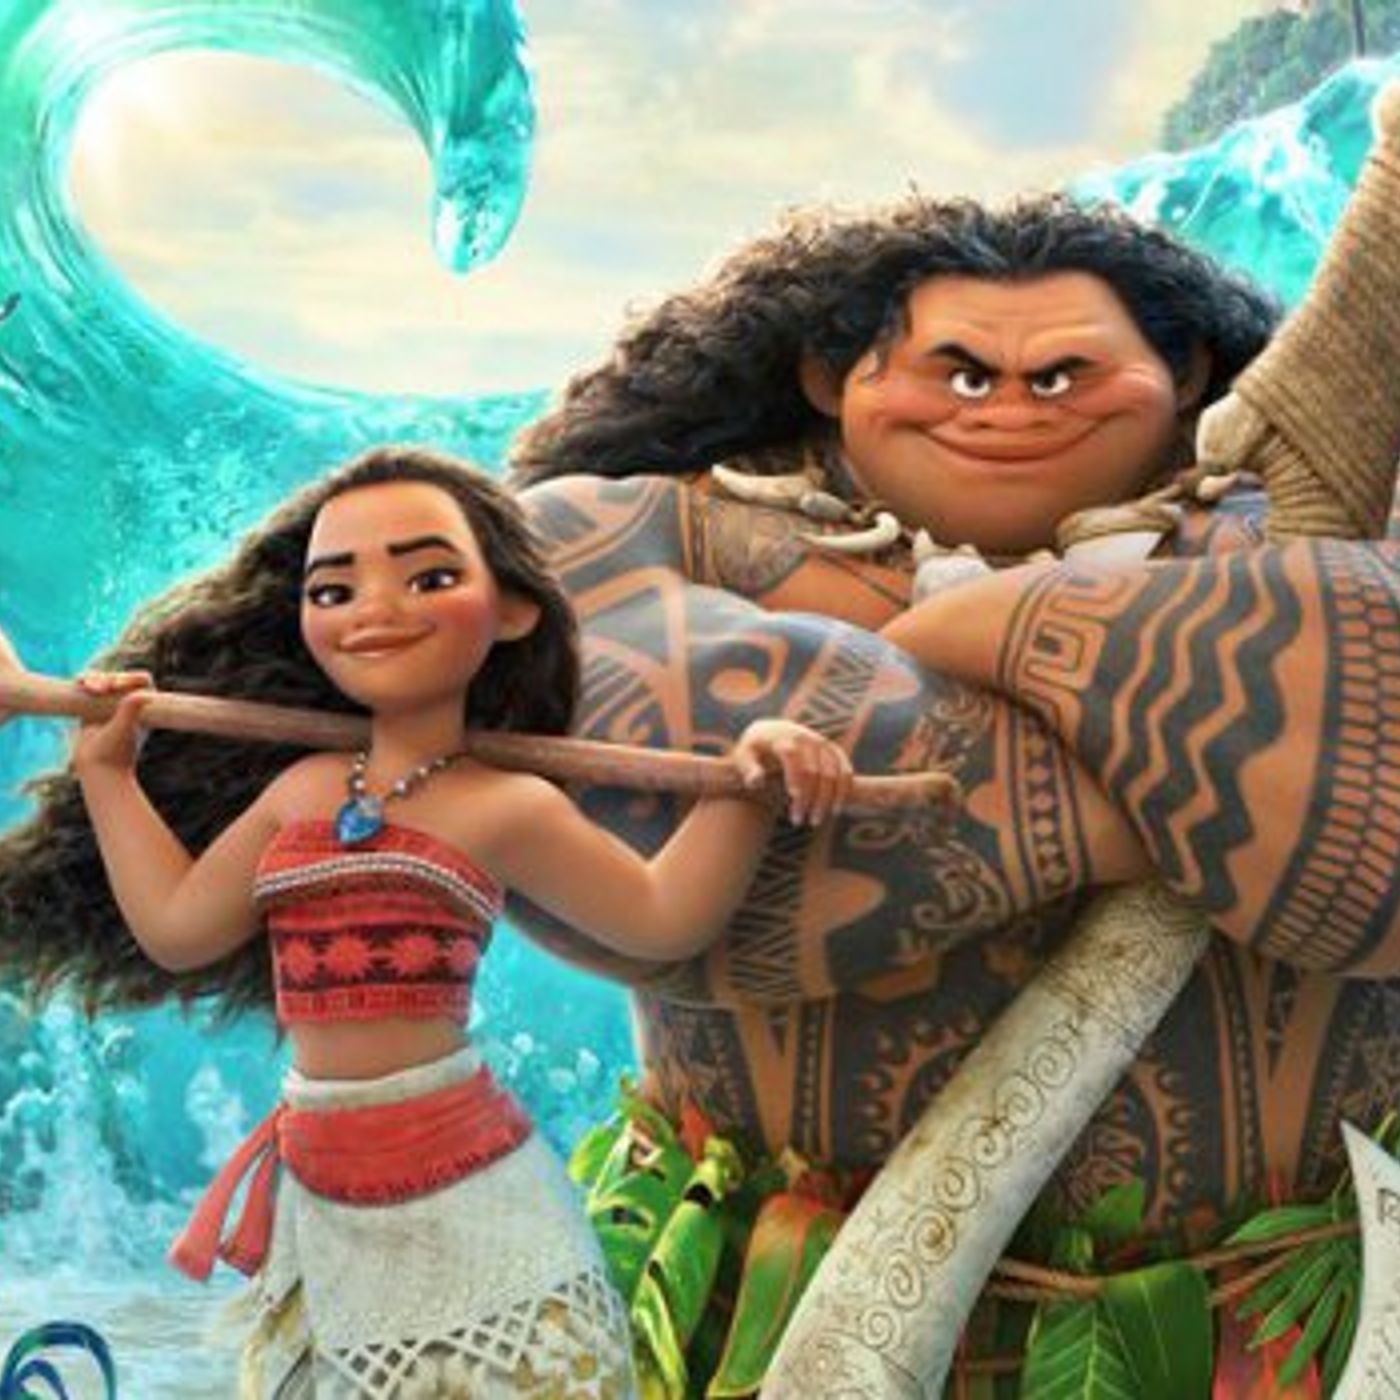 NERDWatch Episode 116: The Moana Review Special?